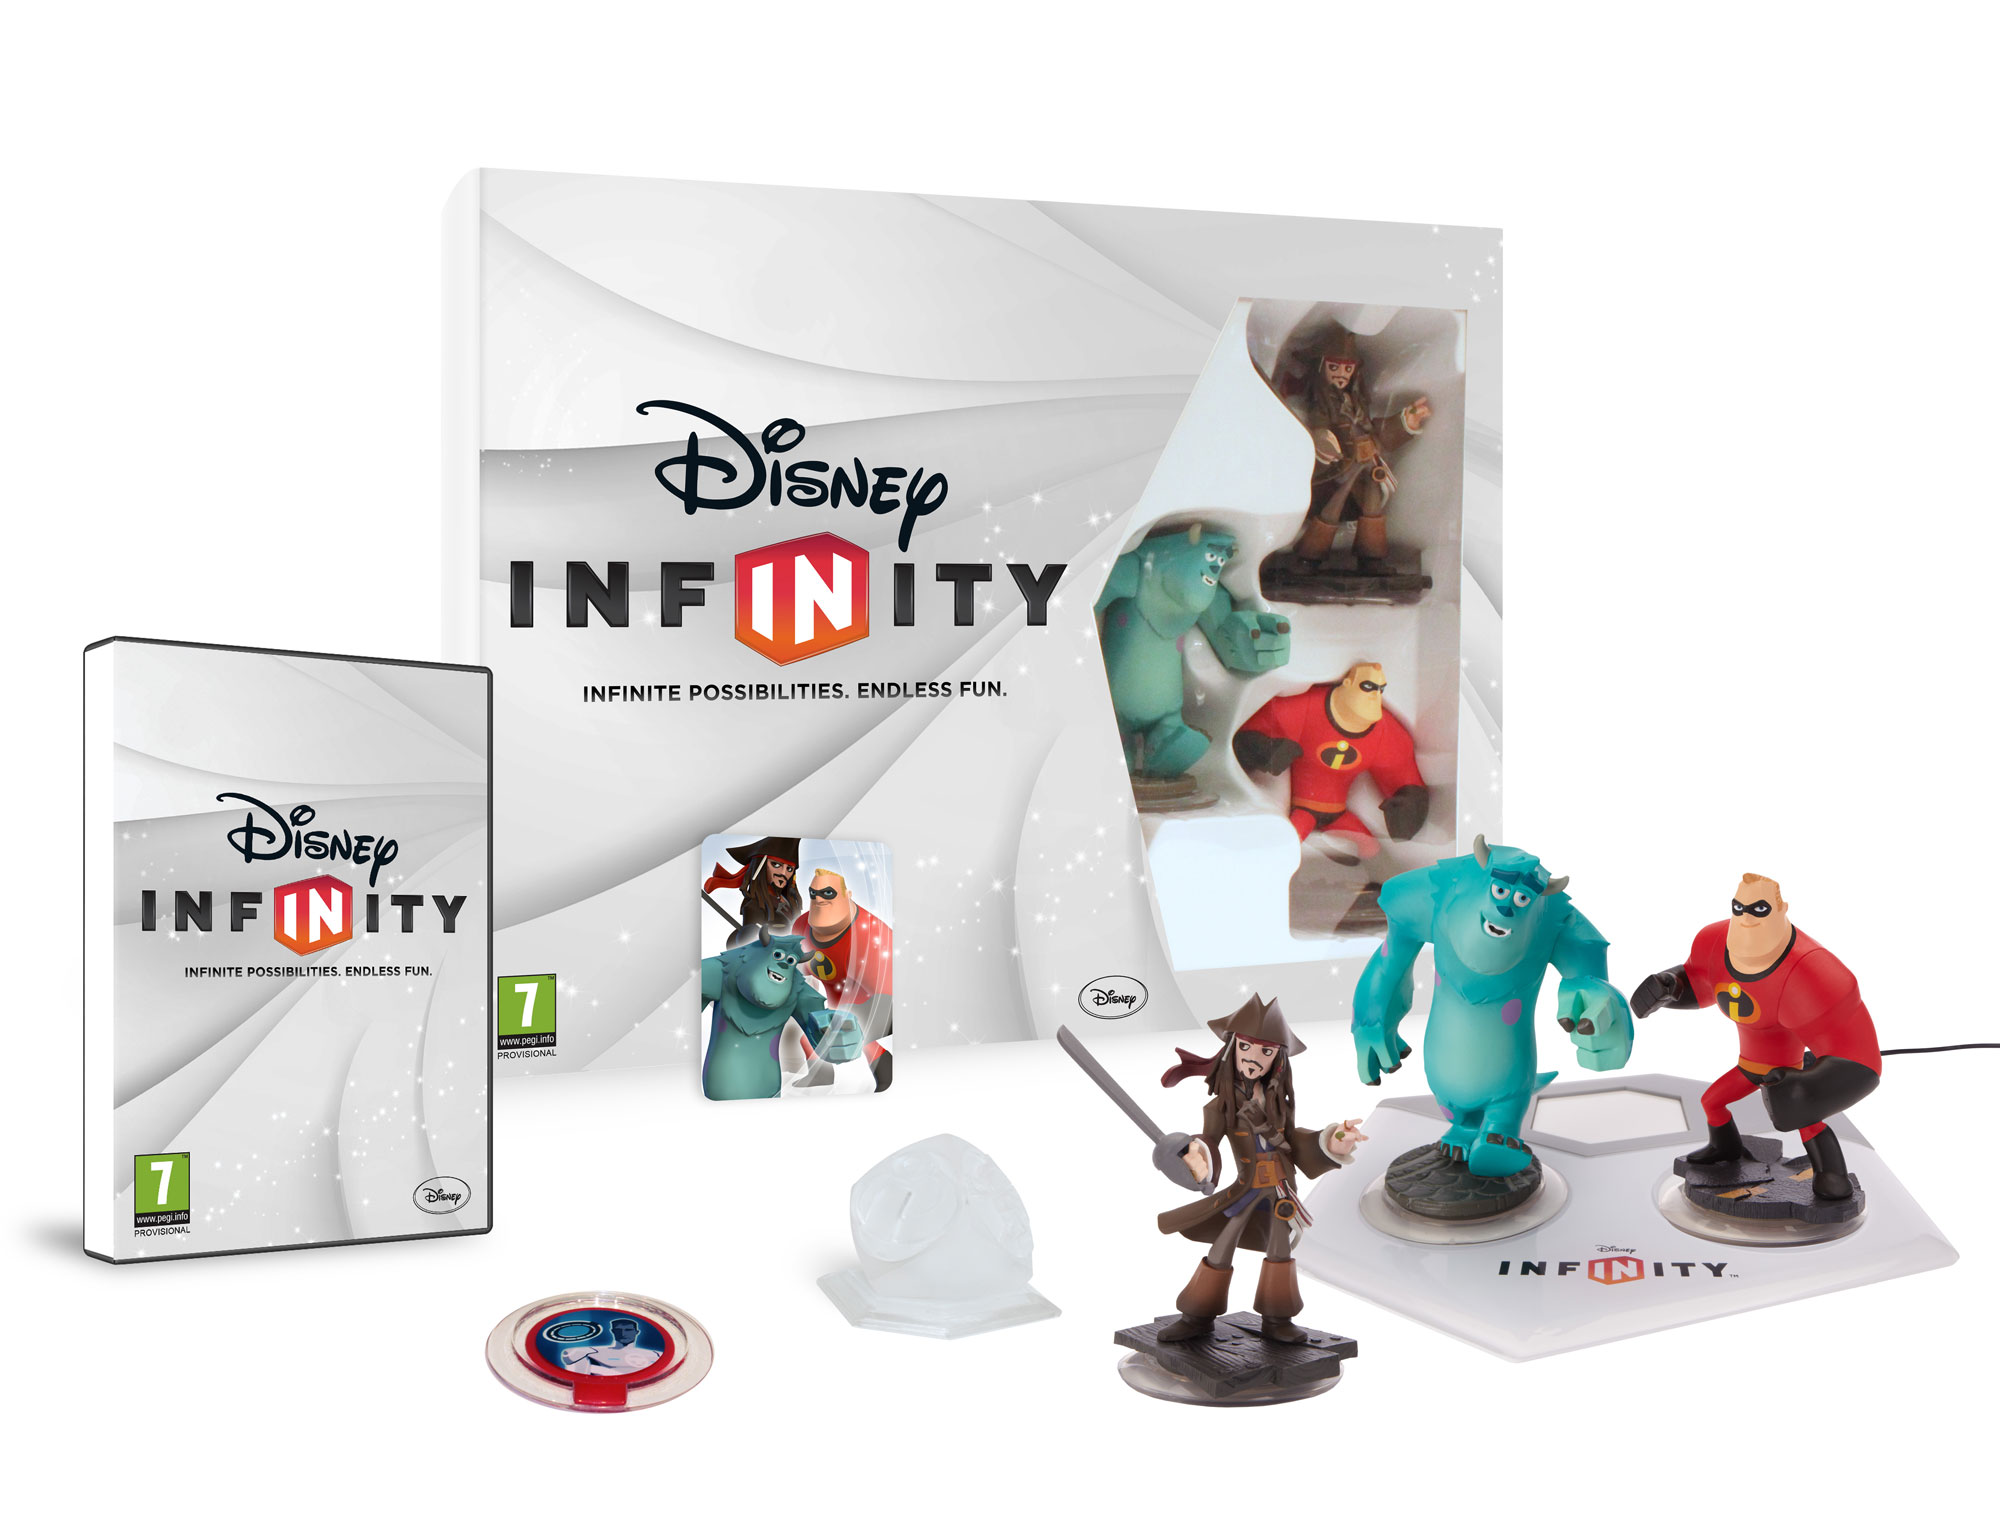 does marvel playsets work with disney infinity 3.0